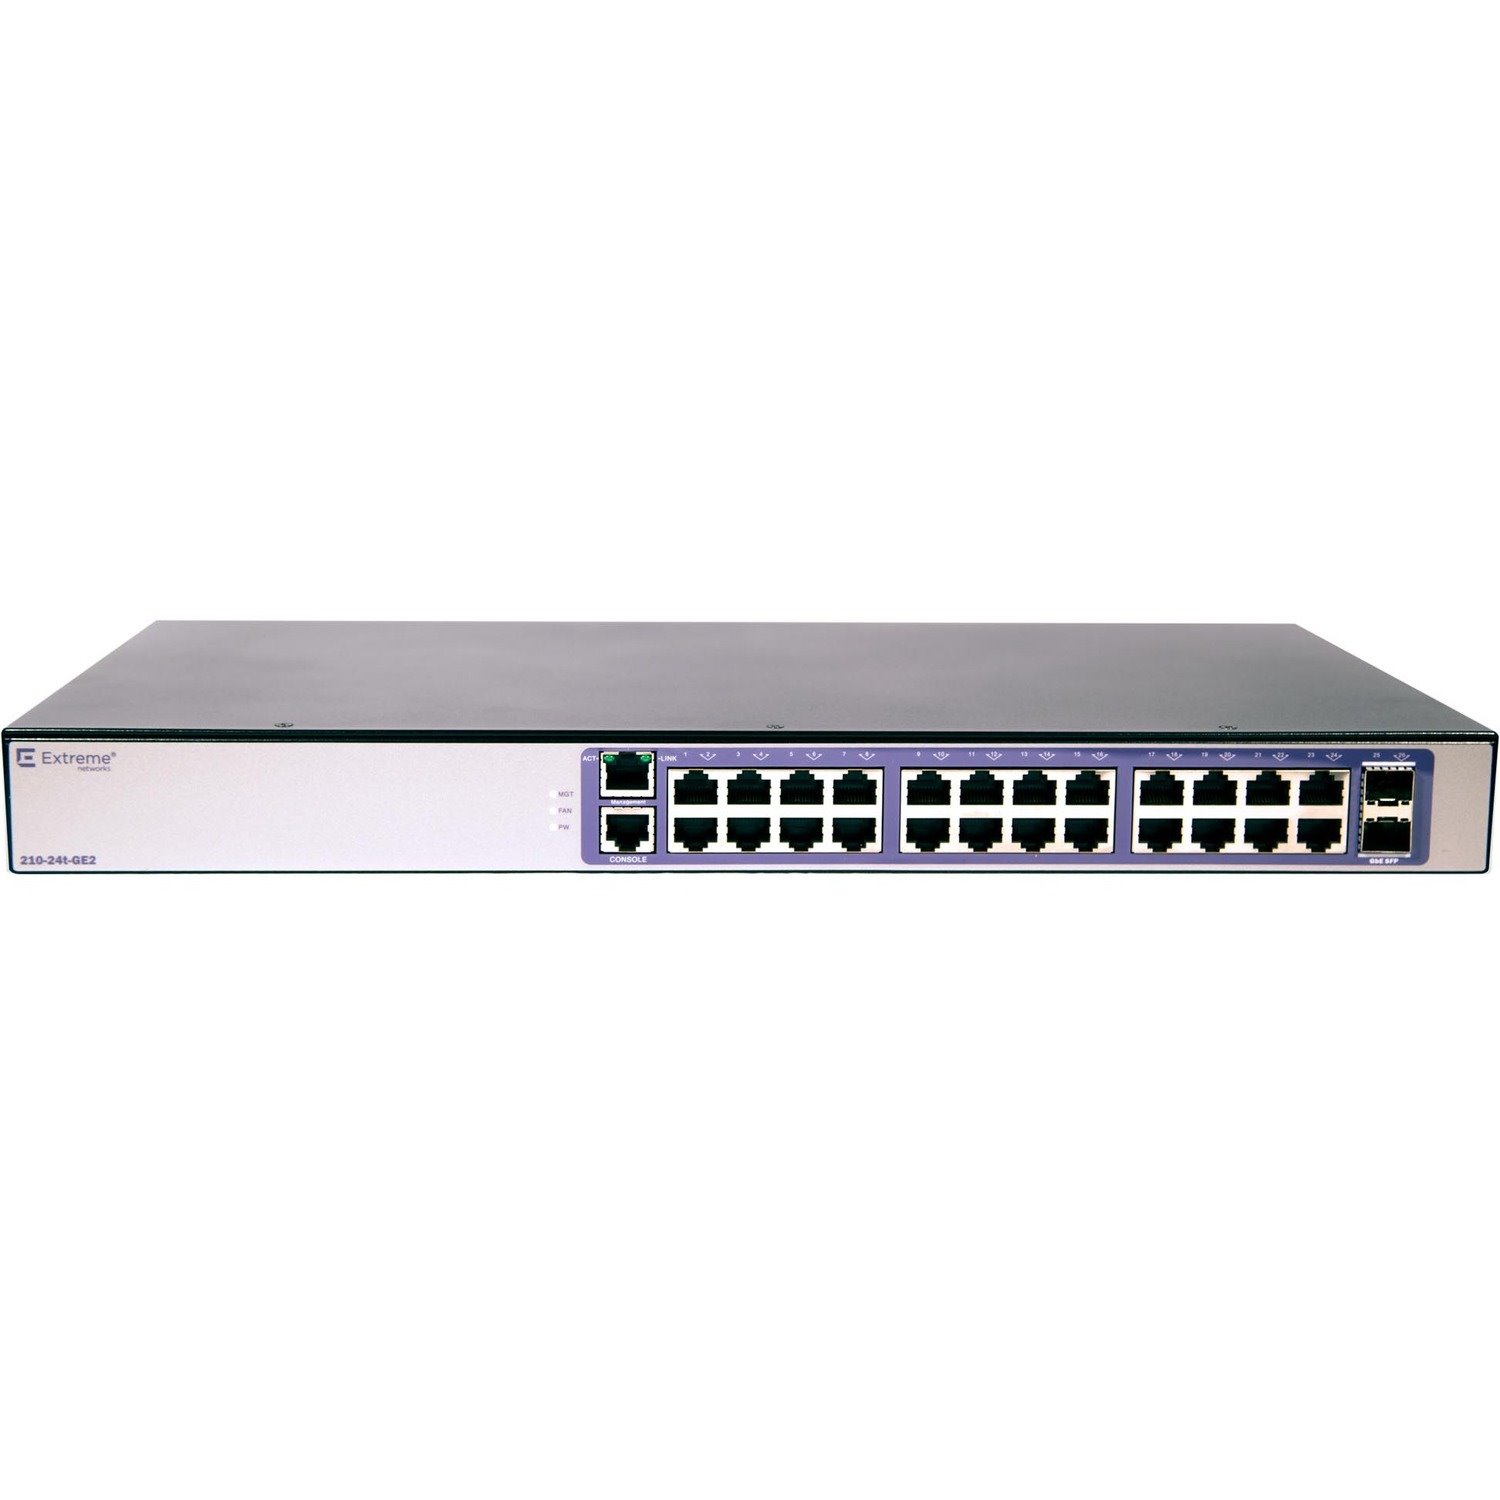 Extreme Networks 210-24t-GE2 Ethernet Switch